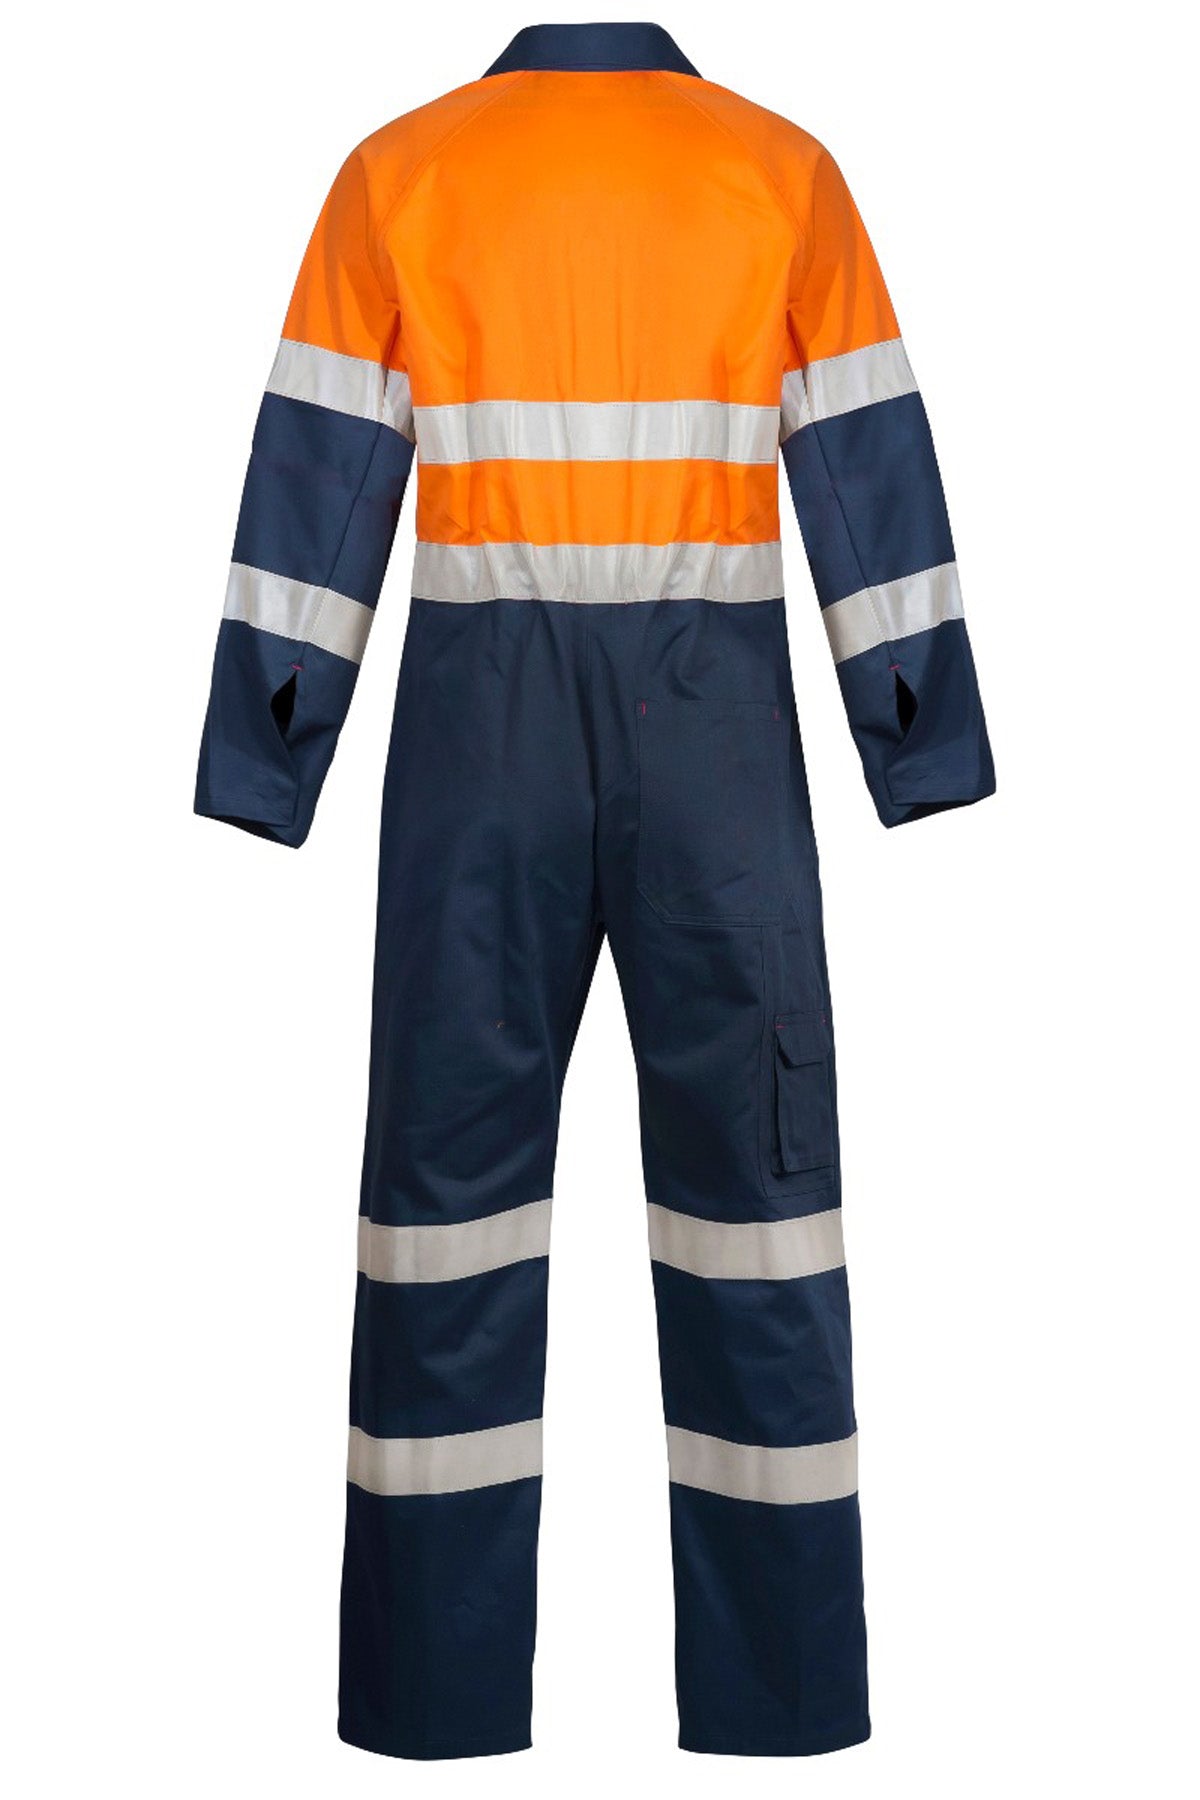 Workcraft WC3056 Hi Vis Cotton Drill Reflective Industrial Laundry Coveralls